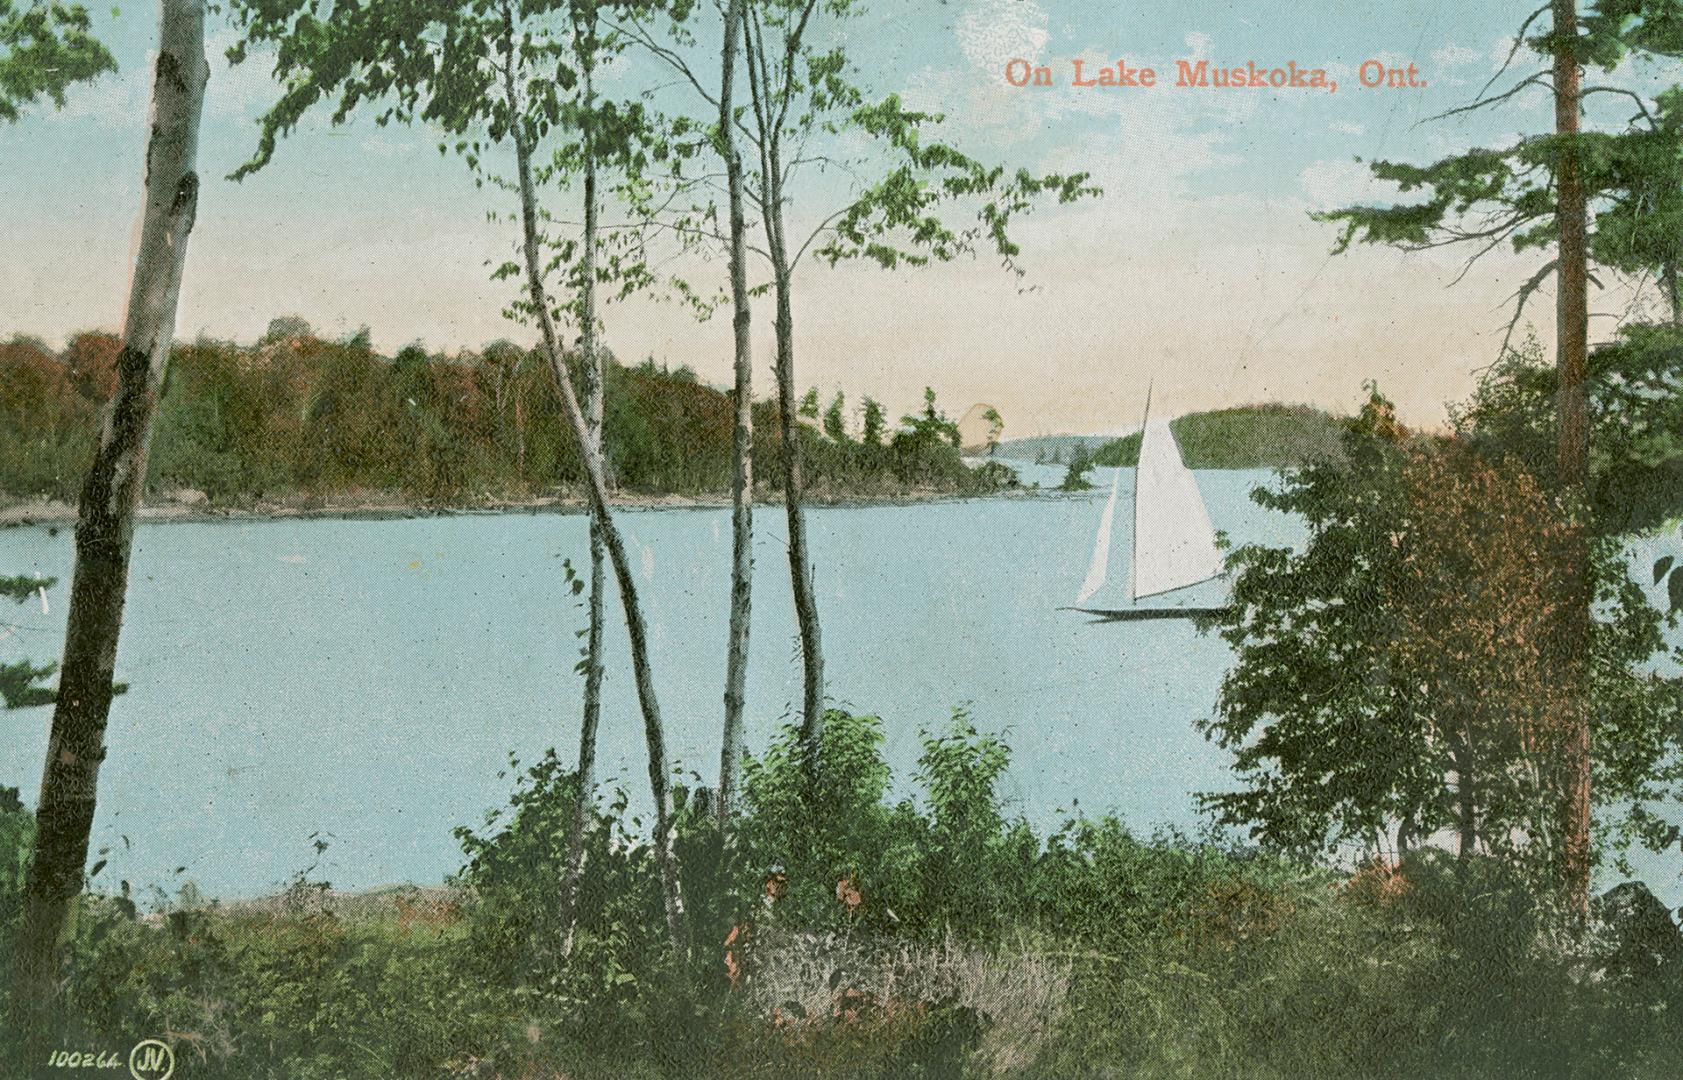 A sailboat on a large lake in the wilderness.